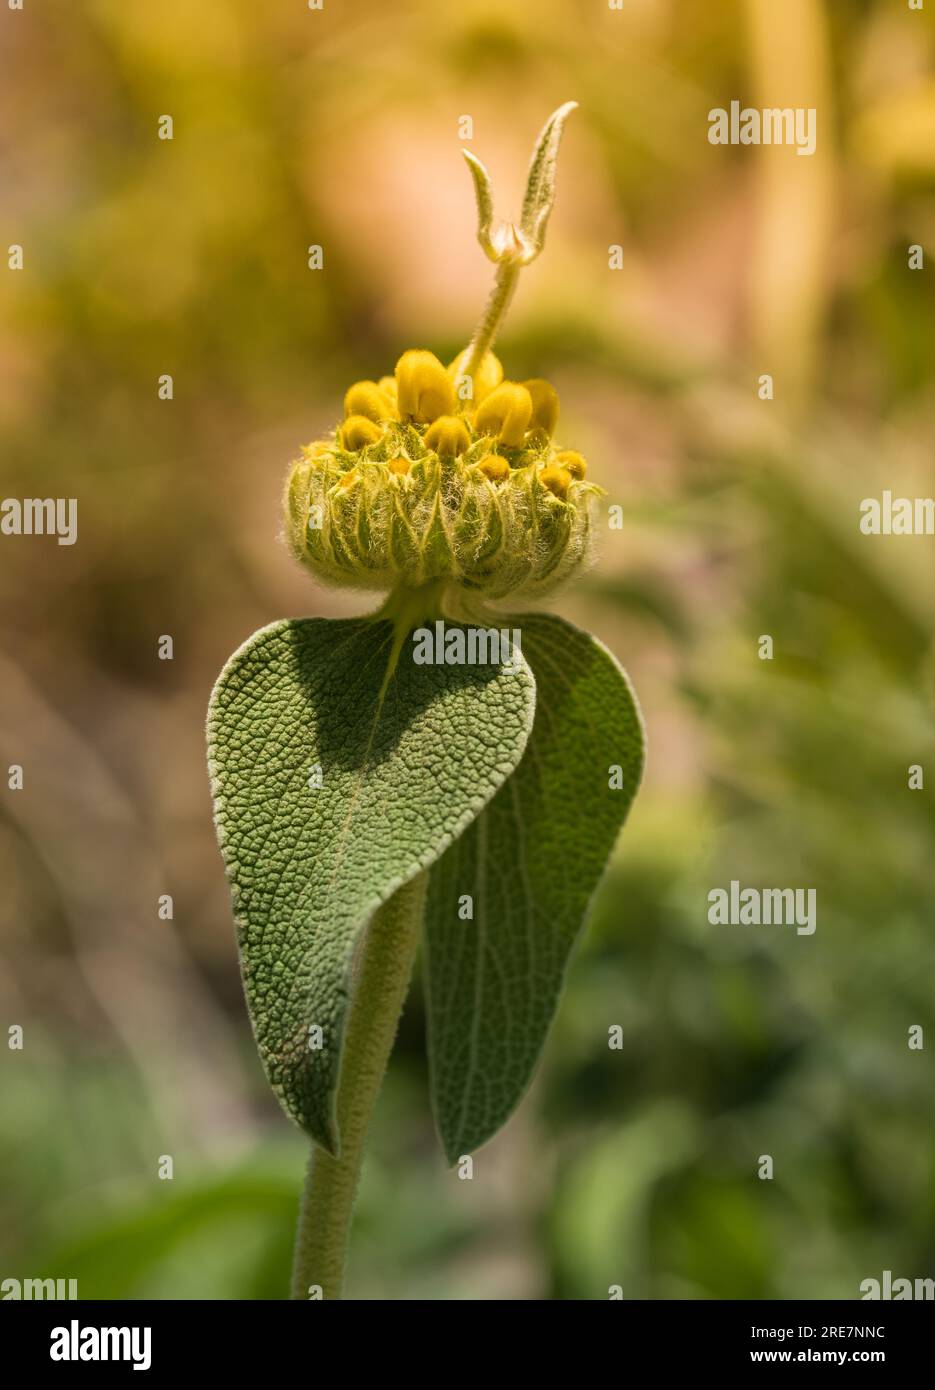 Phlomis fruticosa or 'Jerusalem sage' buds and leaves on the blurred background Stock Photo